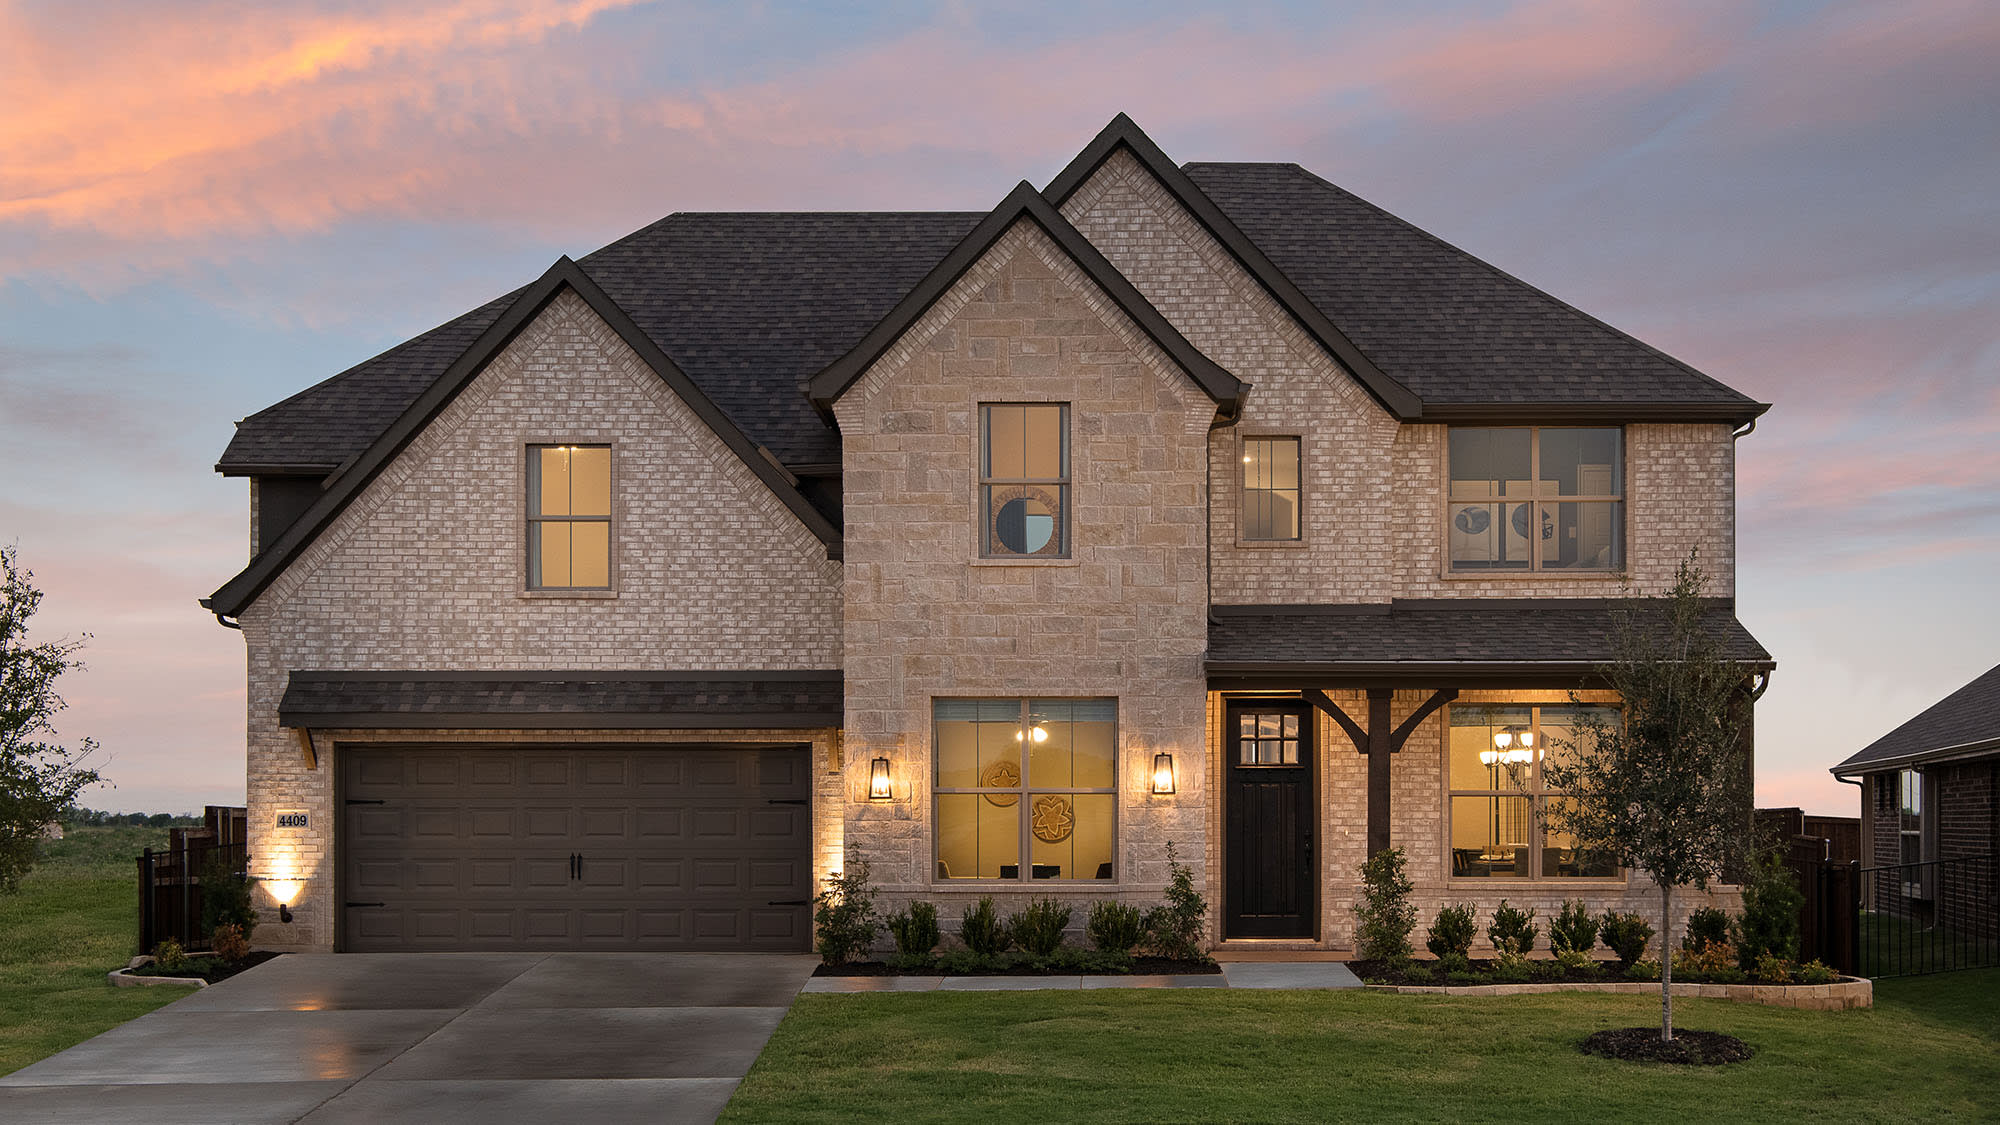 Elevation B with Stone | Concept 3135 at Silo Mills - Signature Series in Joshua, TX by Landsea Homes